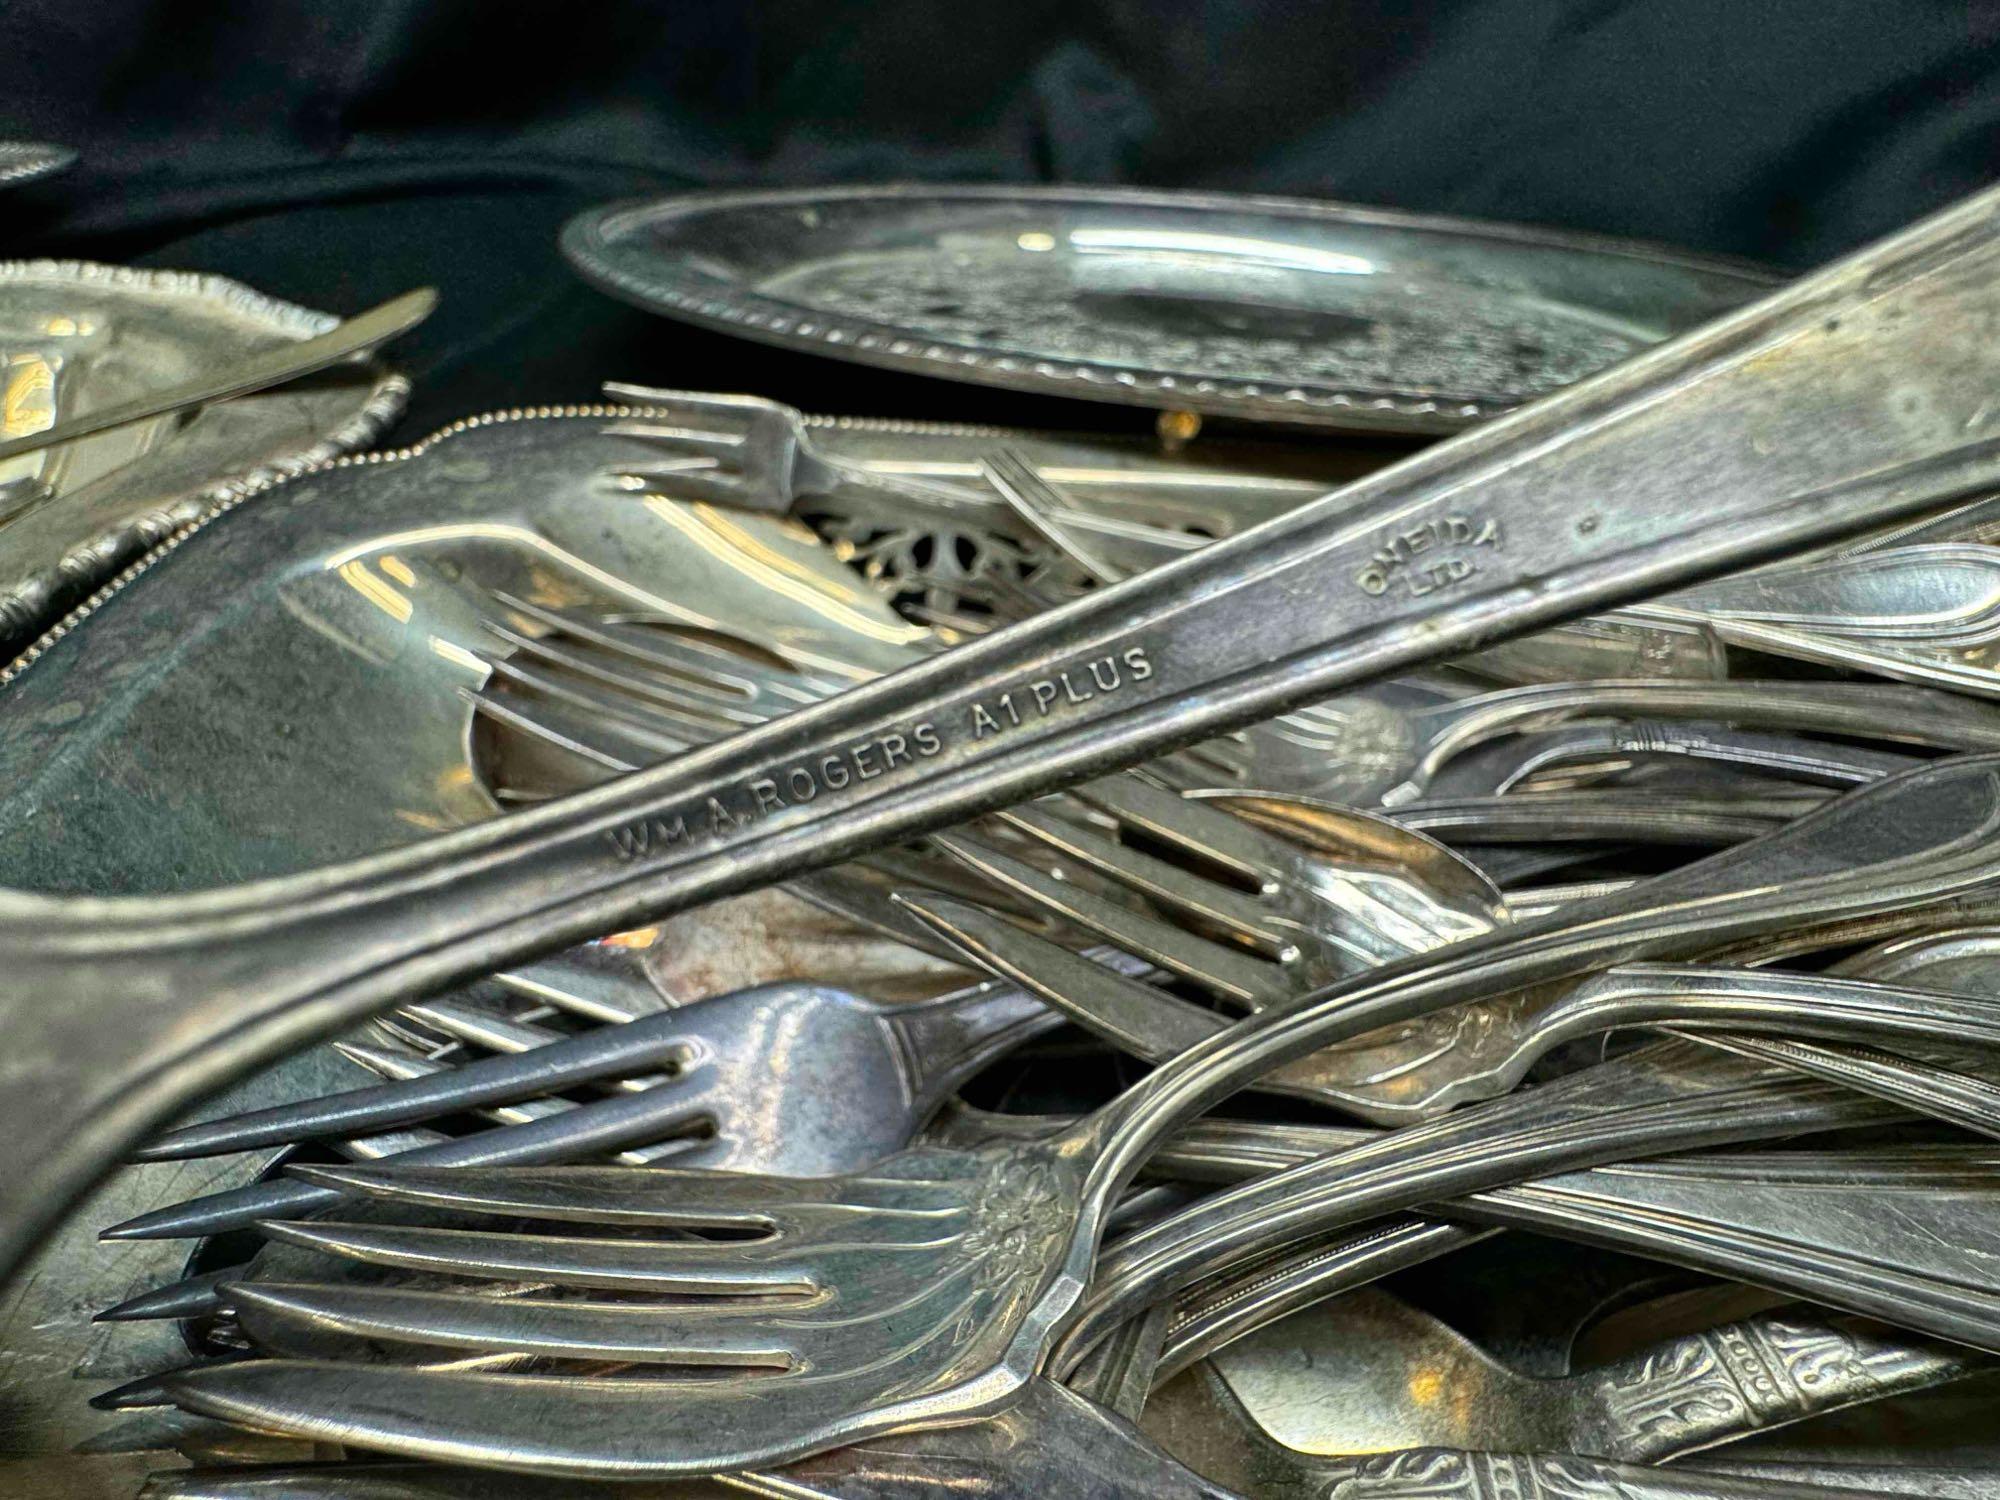 Silver Plated Kitchenware Flatware WM Rogers, GOWE SILBER, Sweden, Electro Nickleplate more